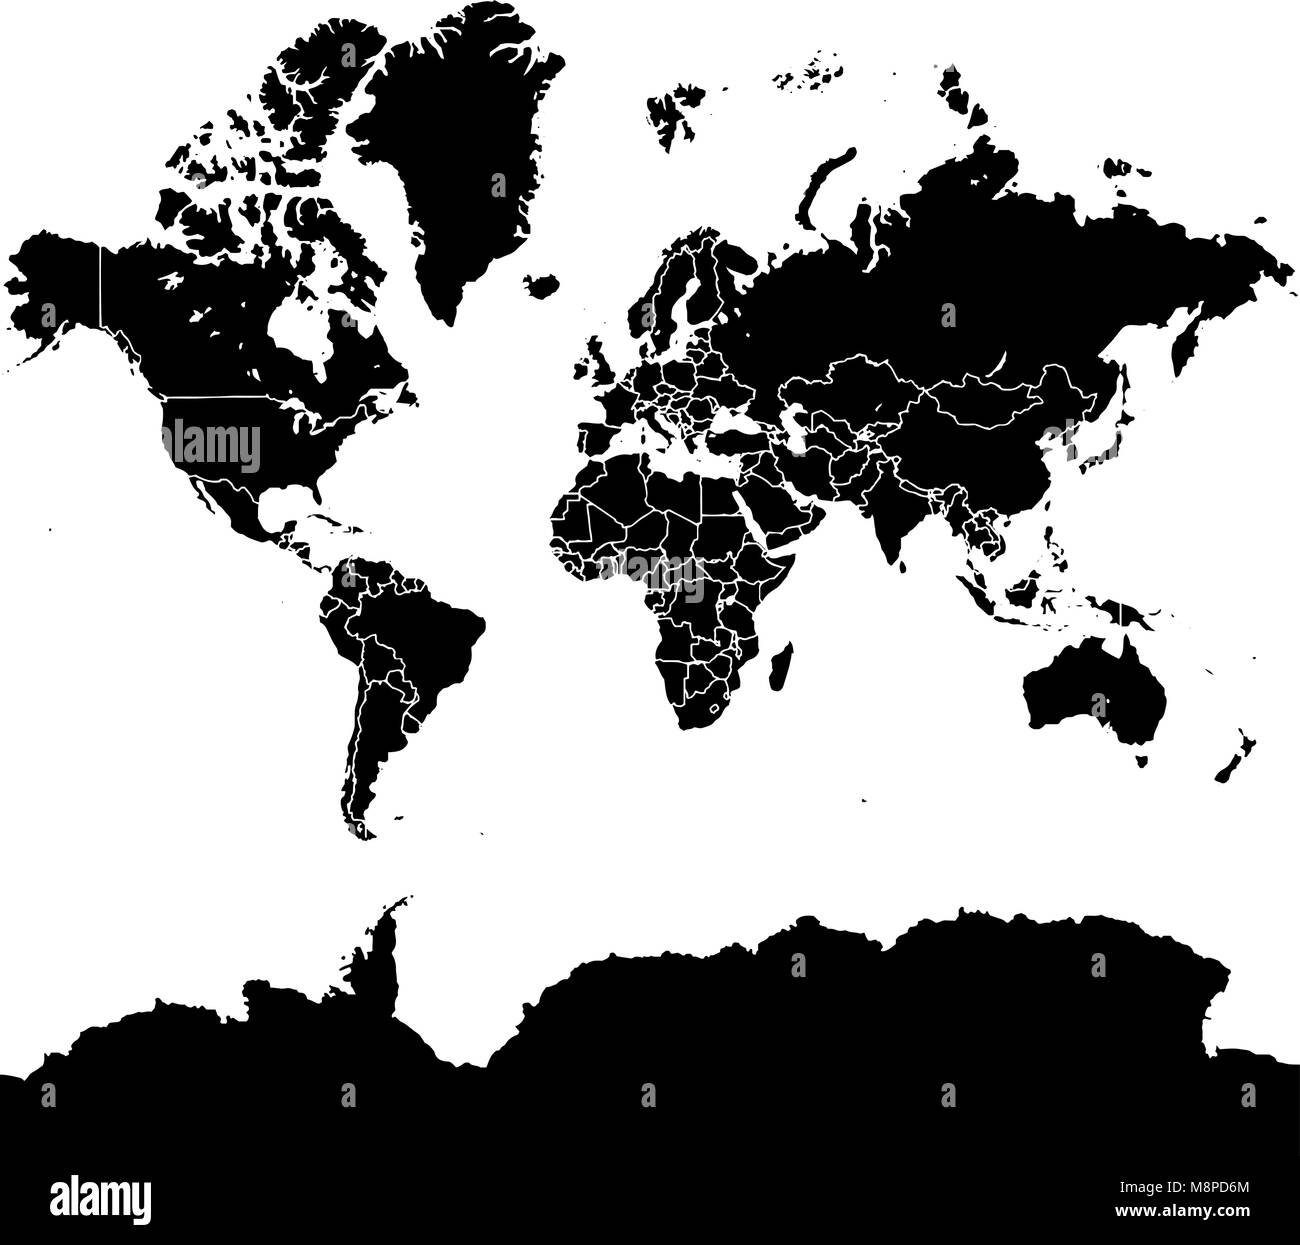 World Map Vector Version on Quadratic Background. Political Black and White Version Stock Vector